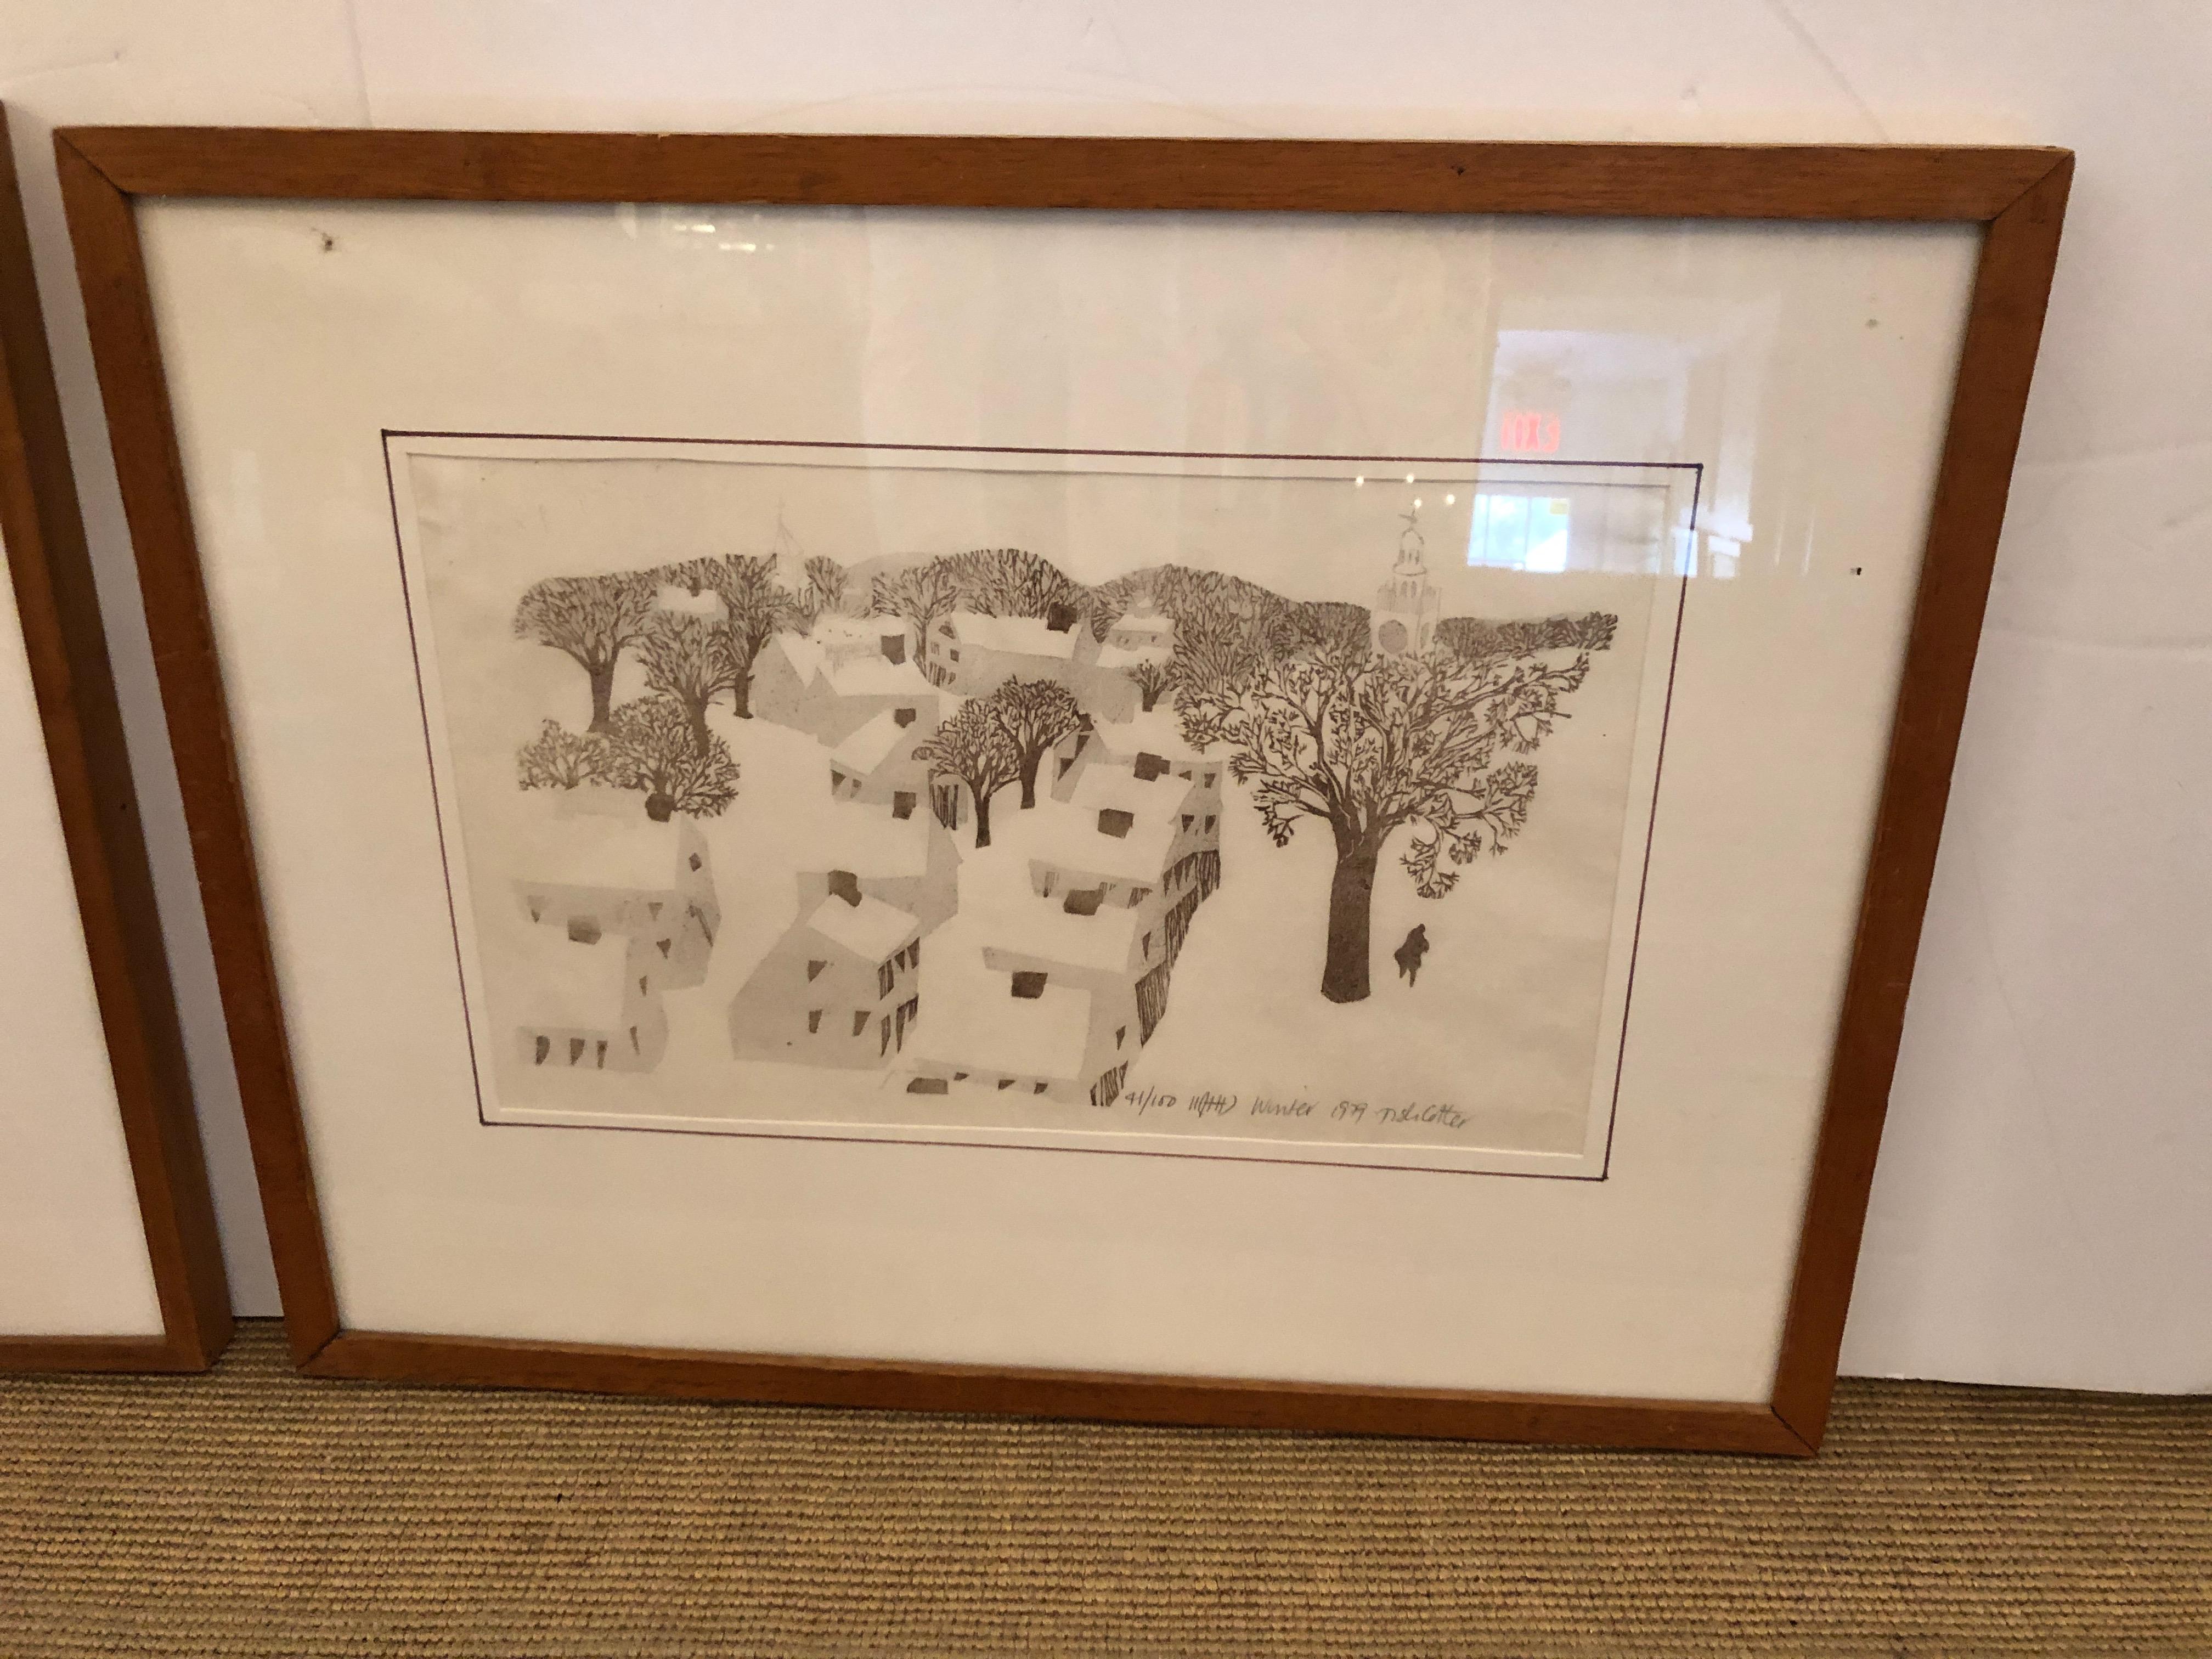 Two muted lovely limited edition etchings signed by the artist Trish Cotter. Both are scenes of her beloved Nantucket Island.
Measures: 41/100 winter 1979 23 x 18 x 1.5
41/83 silver morning 1979 16.25 x 18.25 x 1.